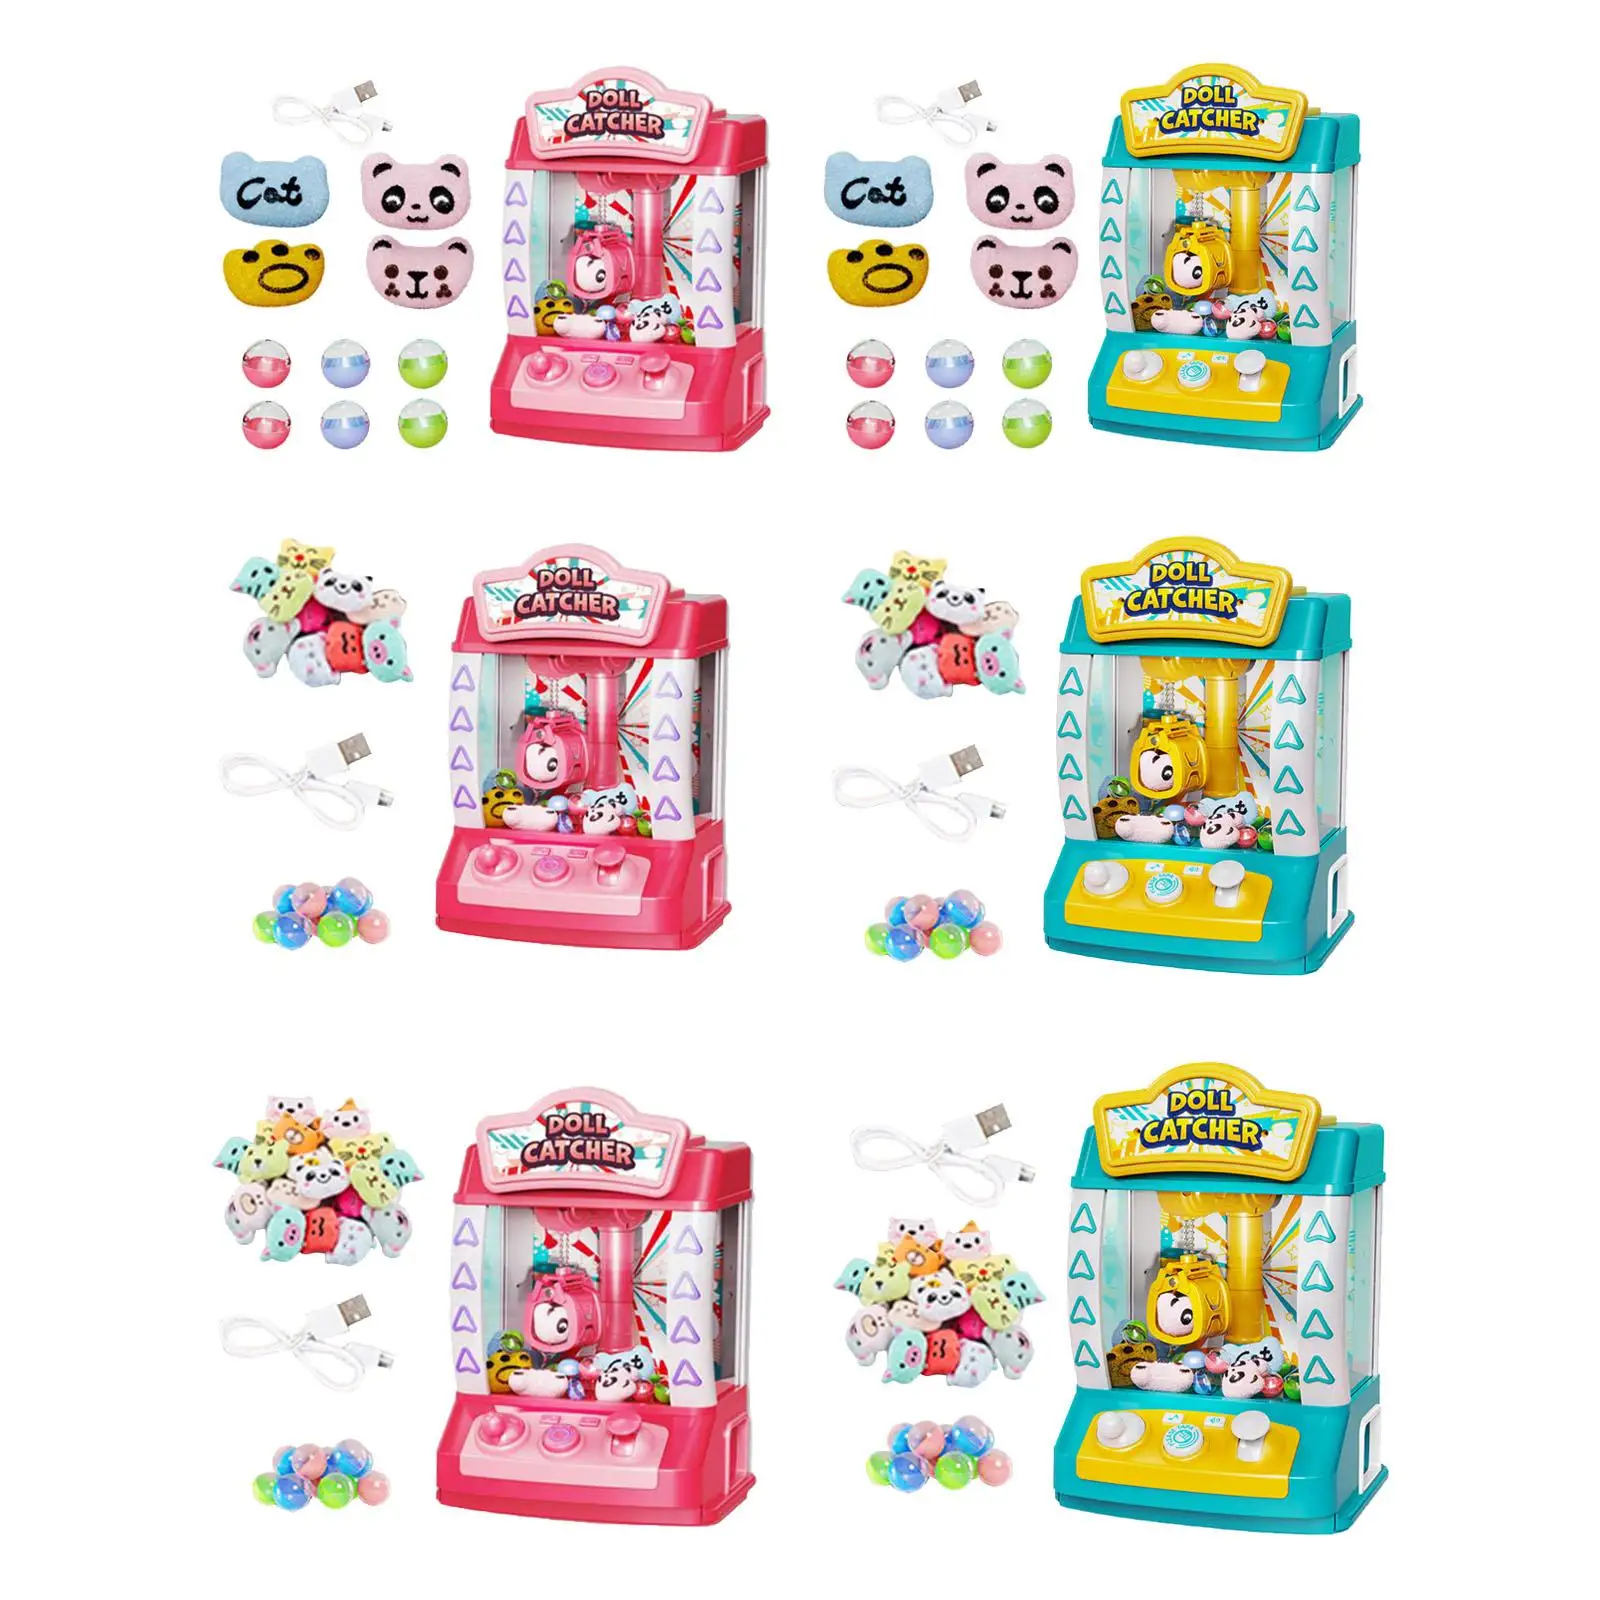 Claw Machine Arcade Game Arcade Candy Capsule Claw Game Prizes Toy Mini Vending Machine for Kids Adults Toddlers Home Girls Boys